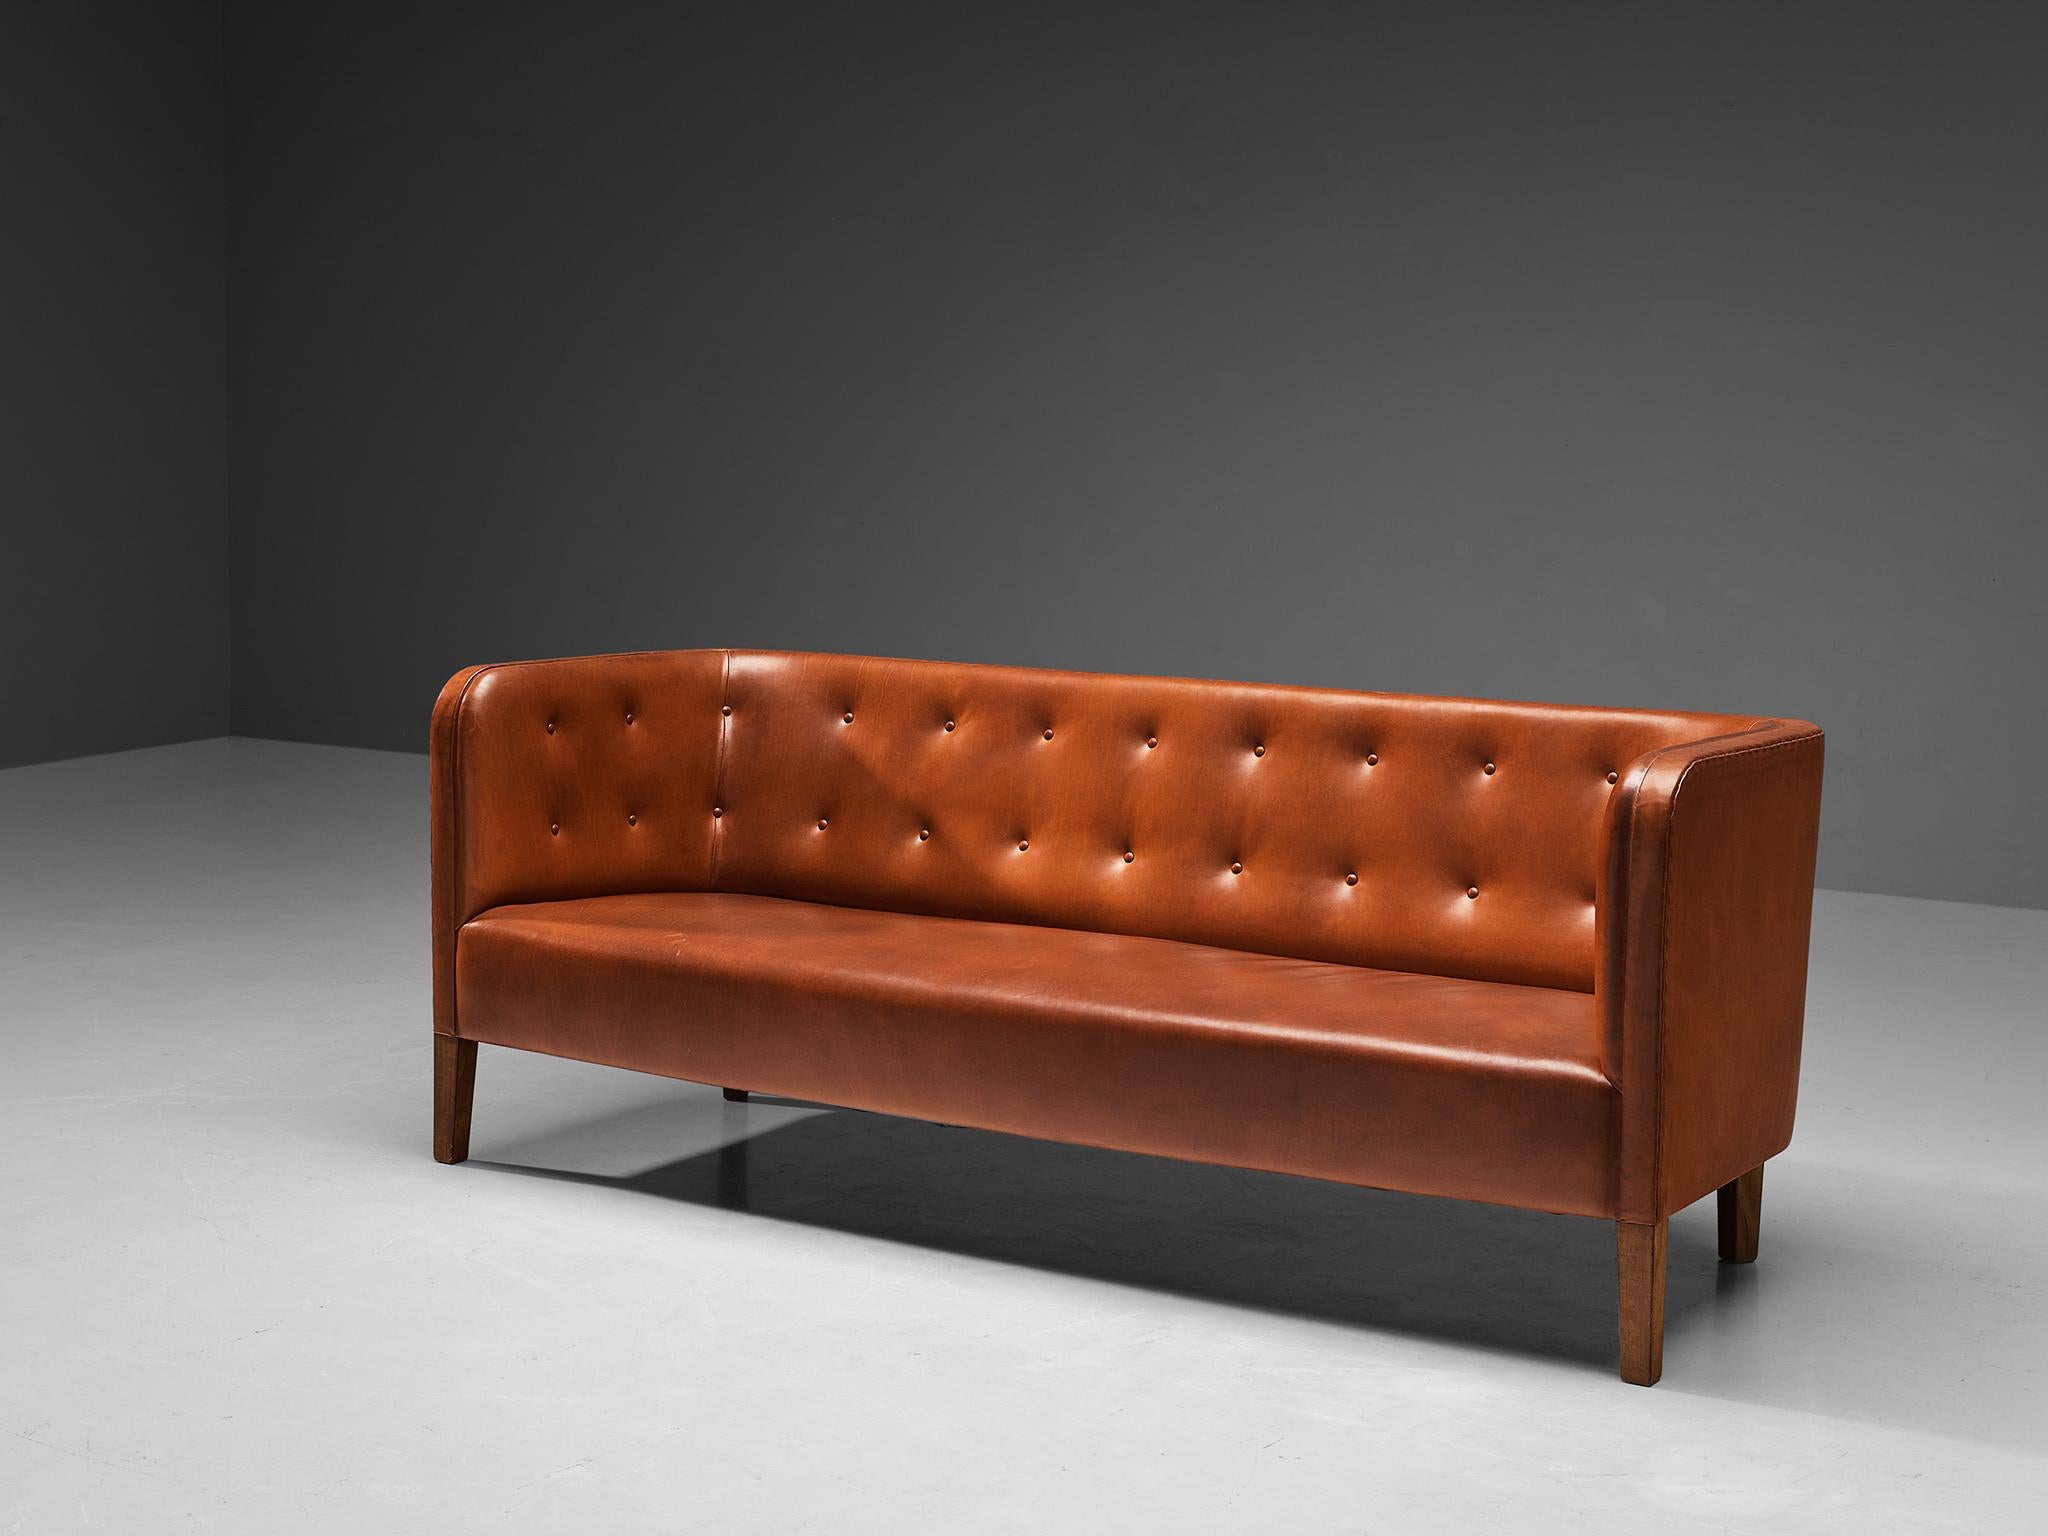 Attributed to Jacob Kjaer, Sofa, leather, mahogany, Denmark, 1940s

This sofa is attributed to the Danish cabinetmaker Jacob Kjaer. The design truly intensifies the experience of sitting by means of the impressive construction featuring delicate